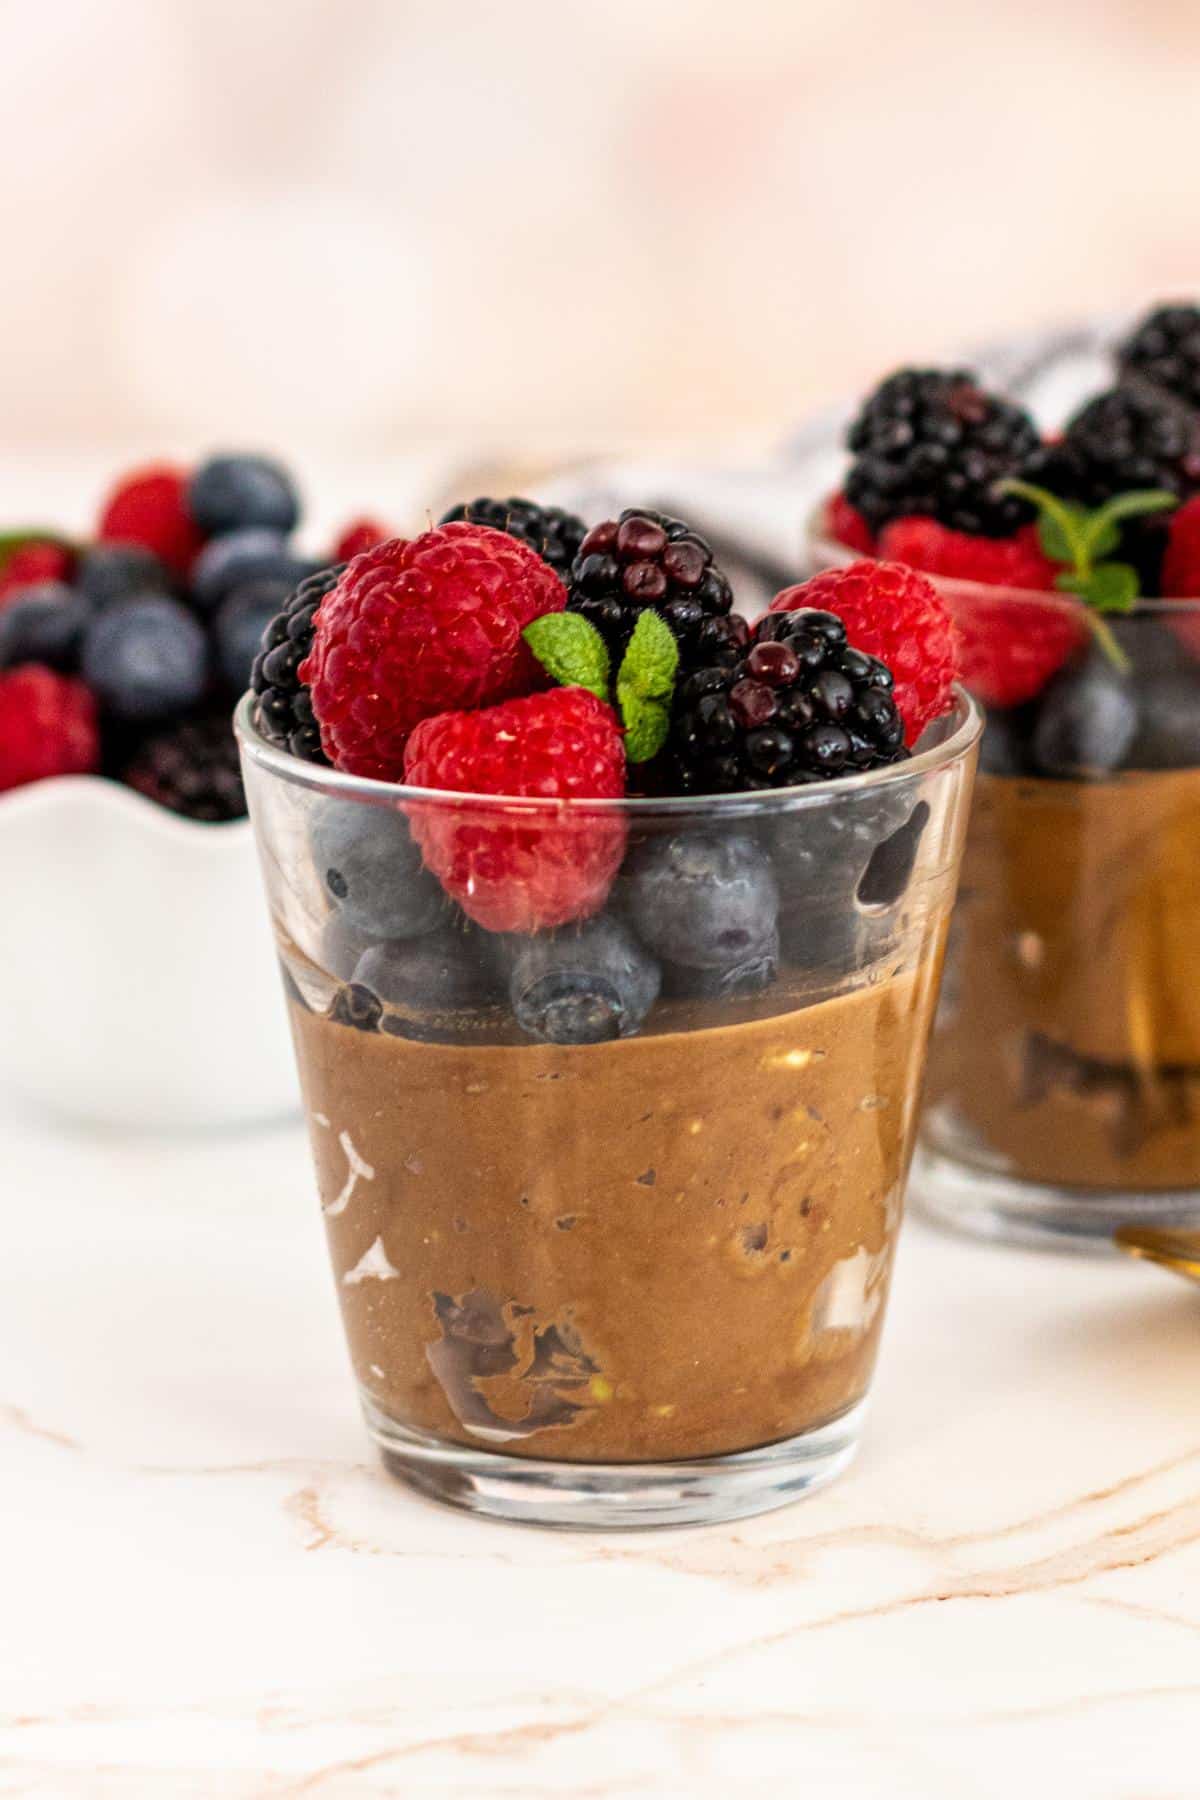 Chocolate mousse in a glass jar topped with blueberries, blackberries, raspberries, and a sprig of mint.